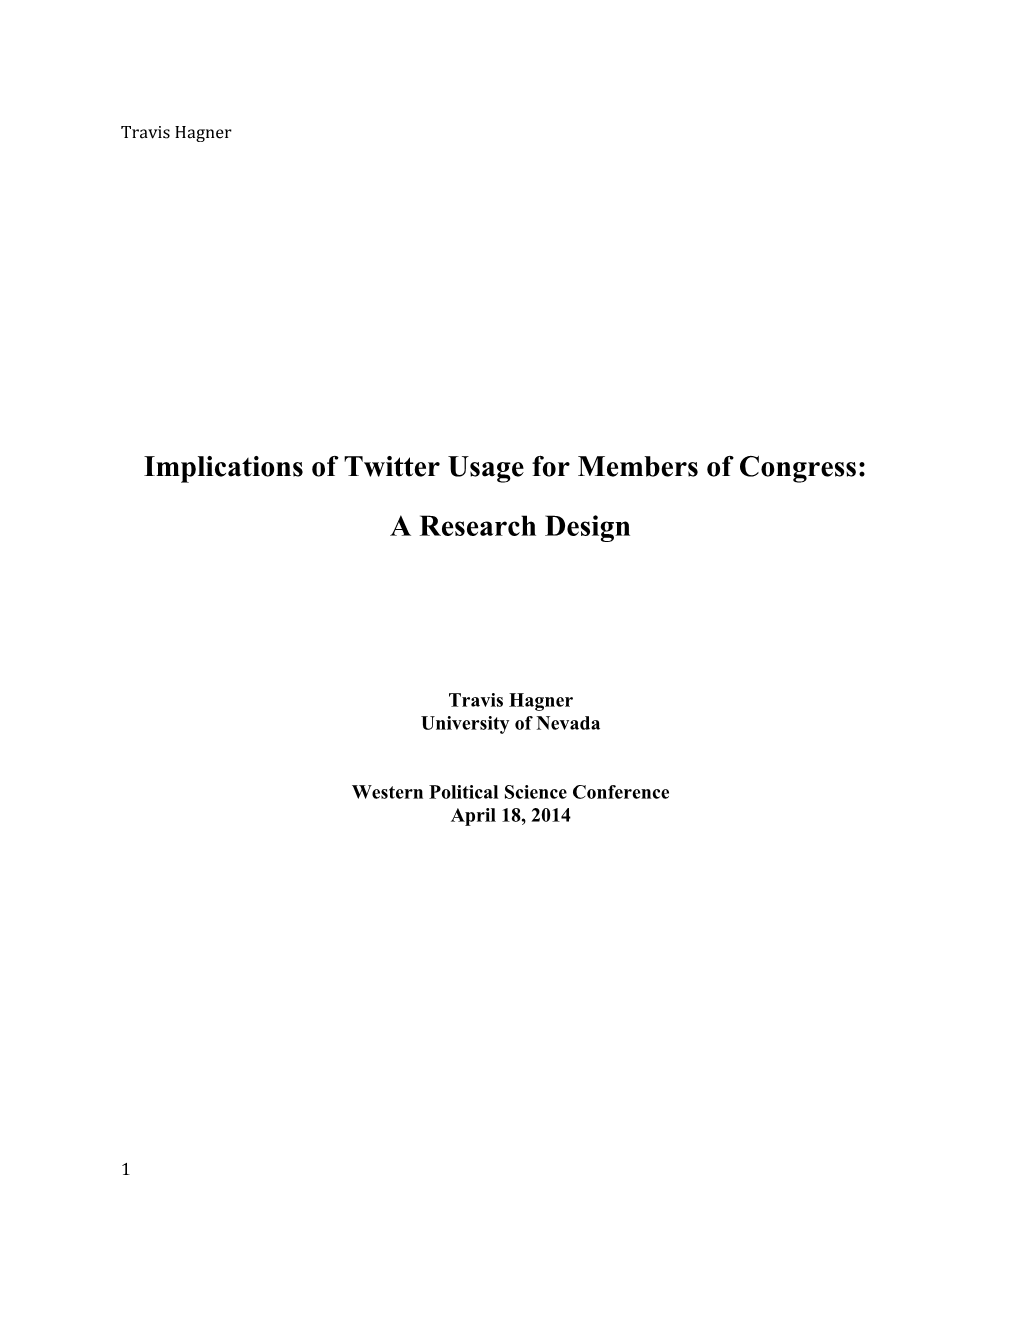 Implications of Twitter Usage for Members of Congress